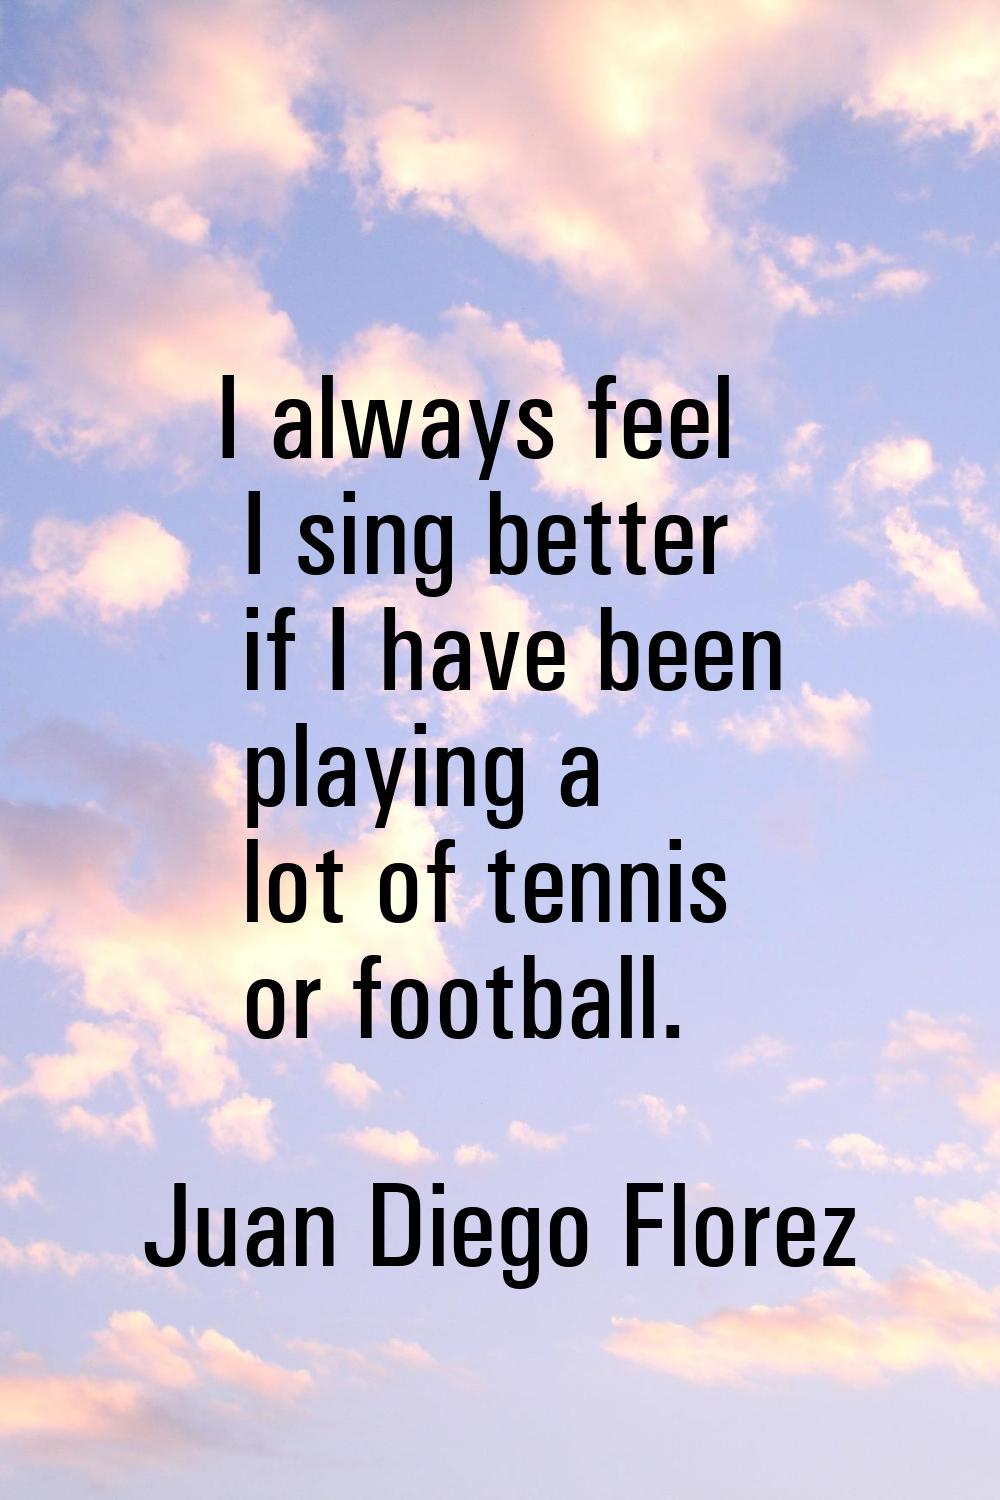 I always feel I sing better if I have been playing a lot of tennis or football.